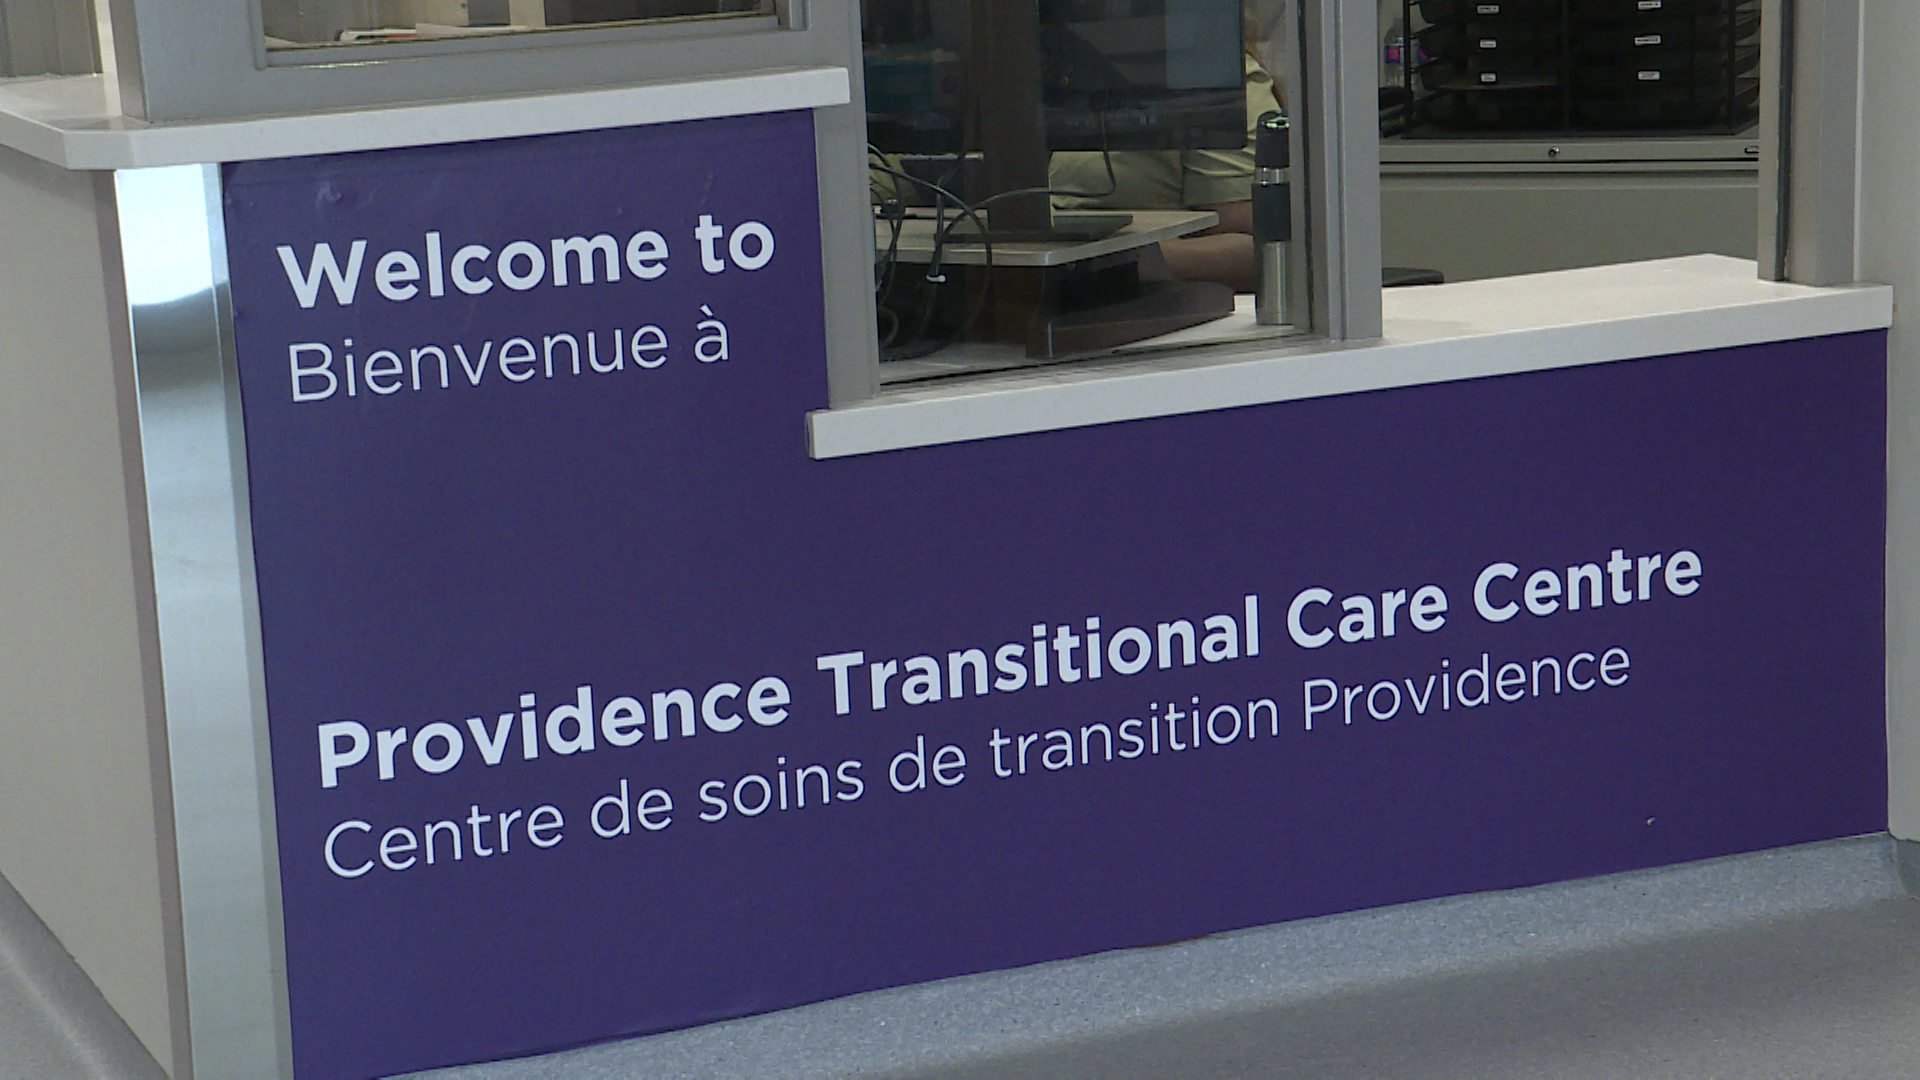 Kingston, Ont. transitional care centre celebrates 1 year since opening - Kingston